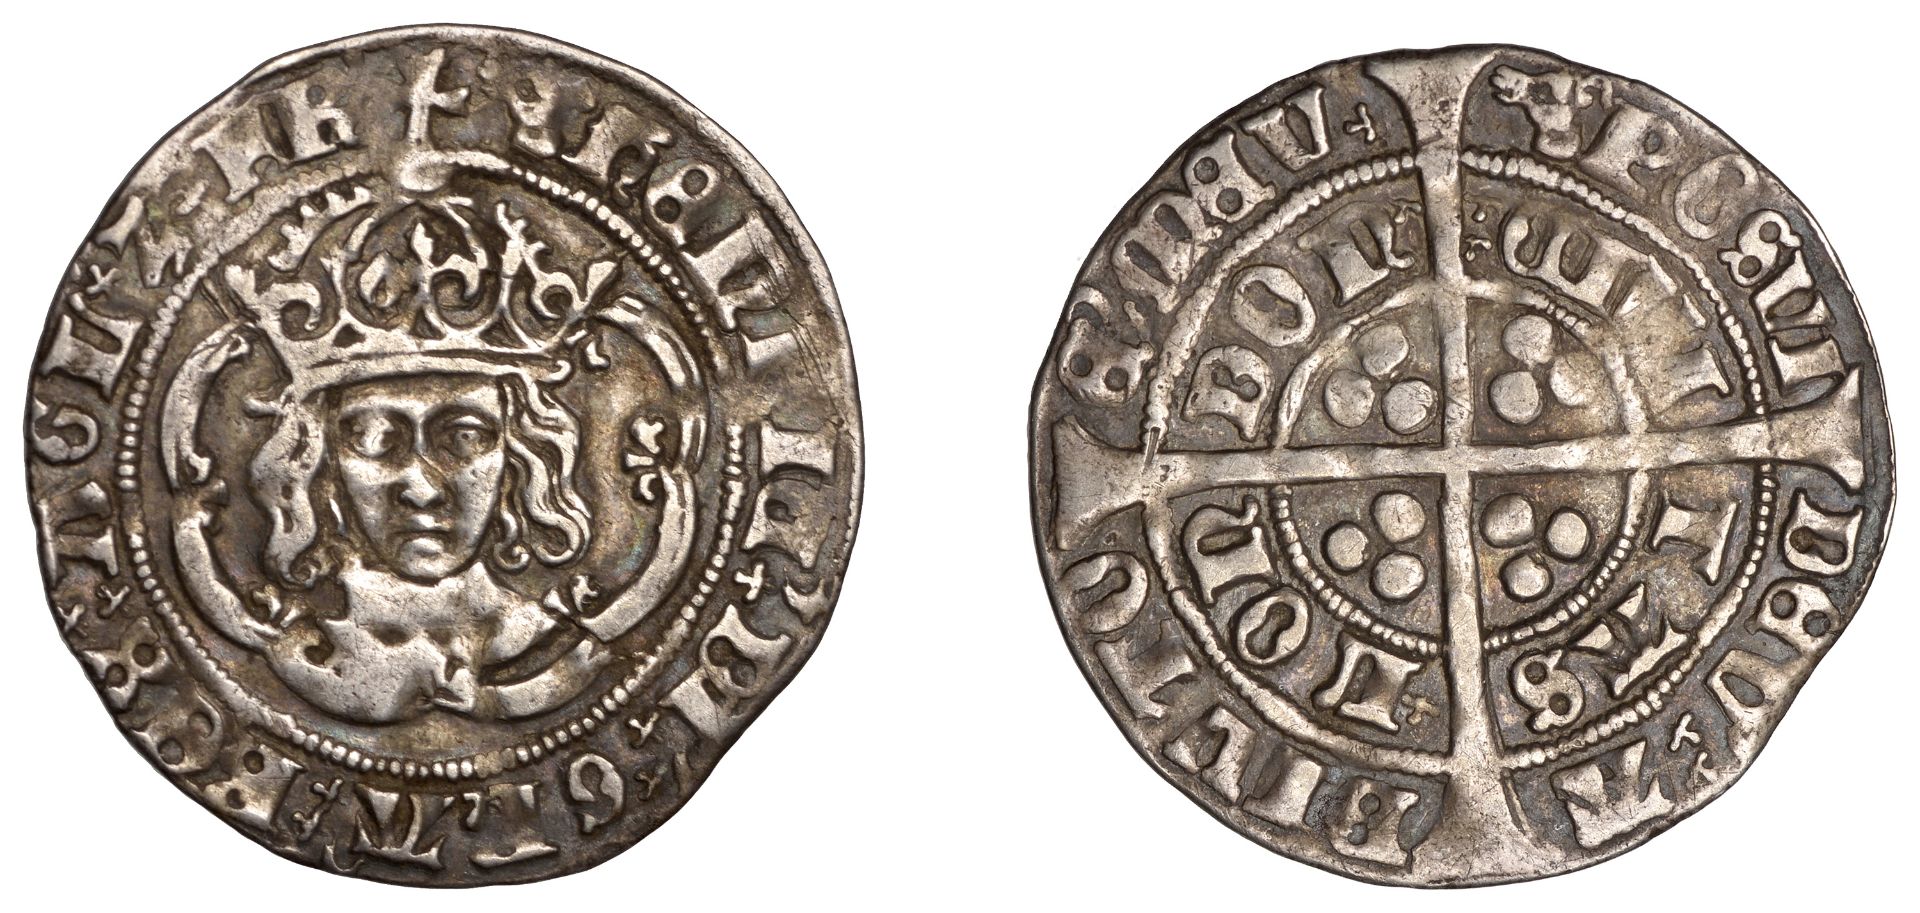 Henry VII (1485-1509), Facing Bust issue, Groat, class IIId, mm. greyhound's head, 2.82g/3h...